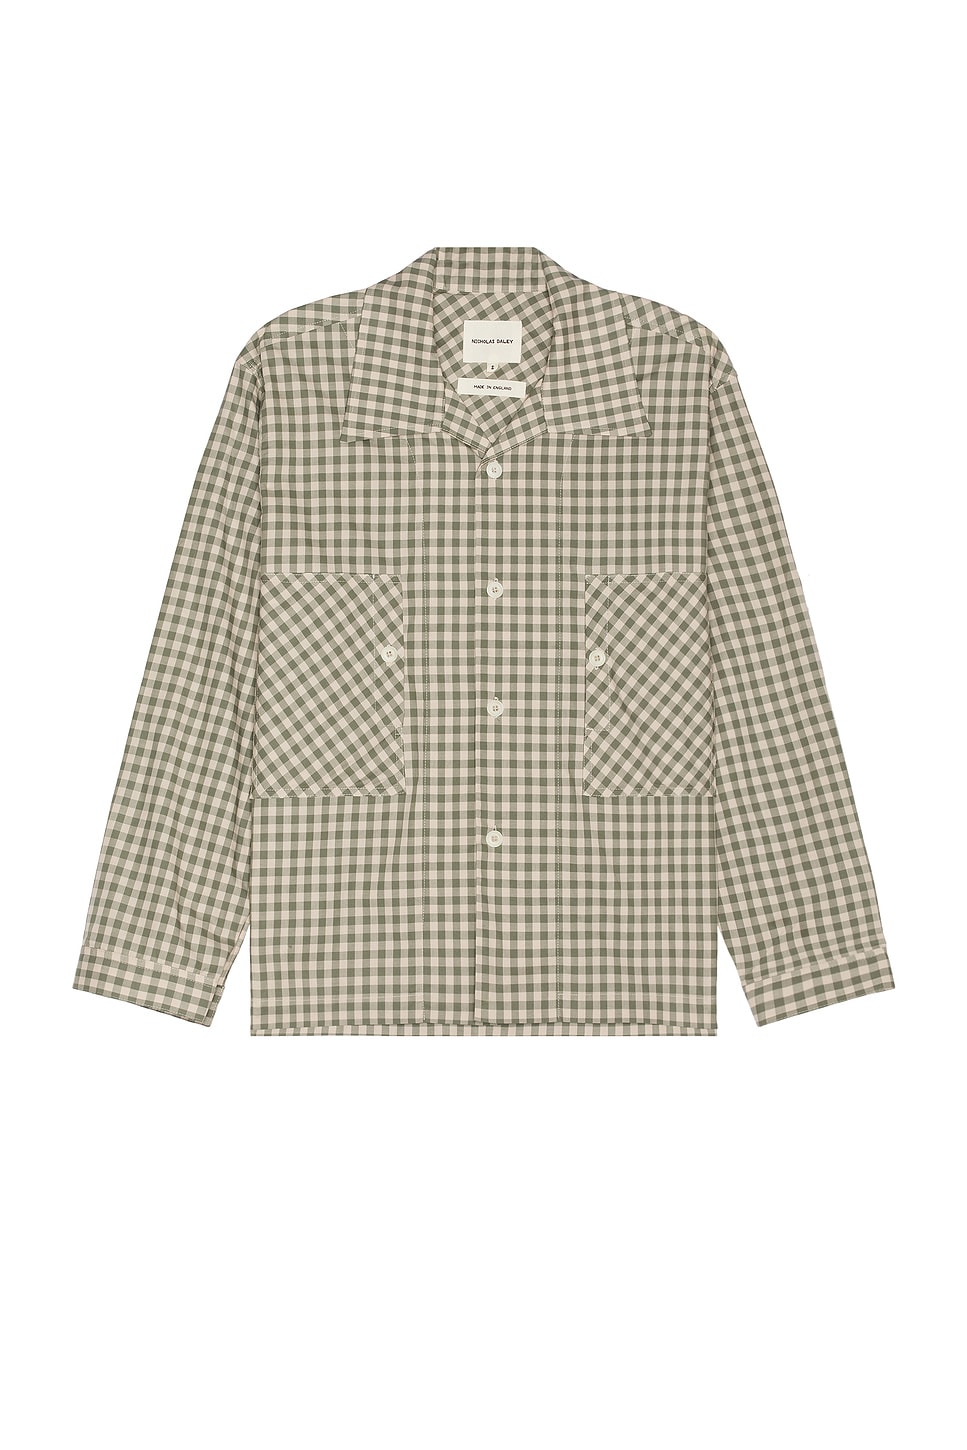 Image 1 of Nicholas Daley Classic Two Pocket Shirt in Green